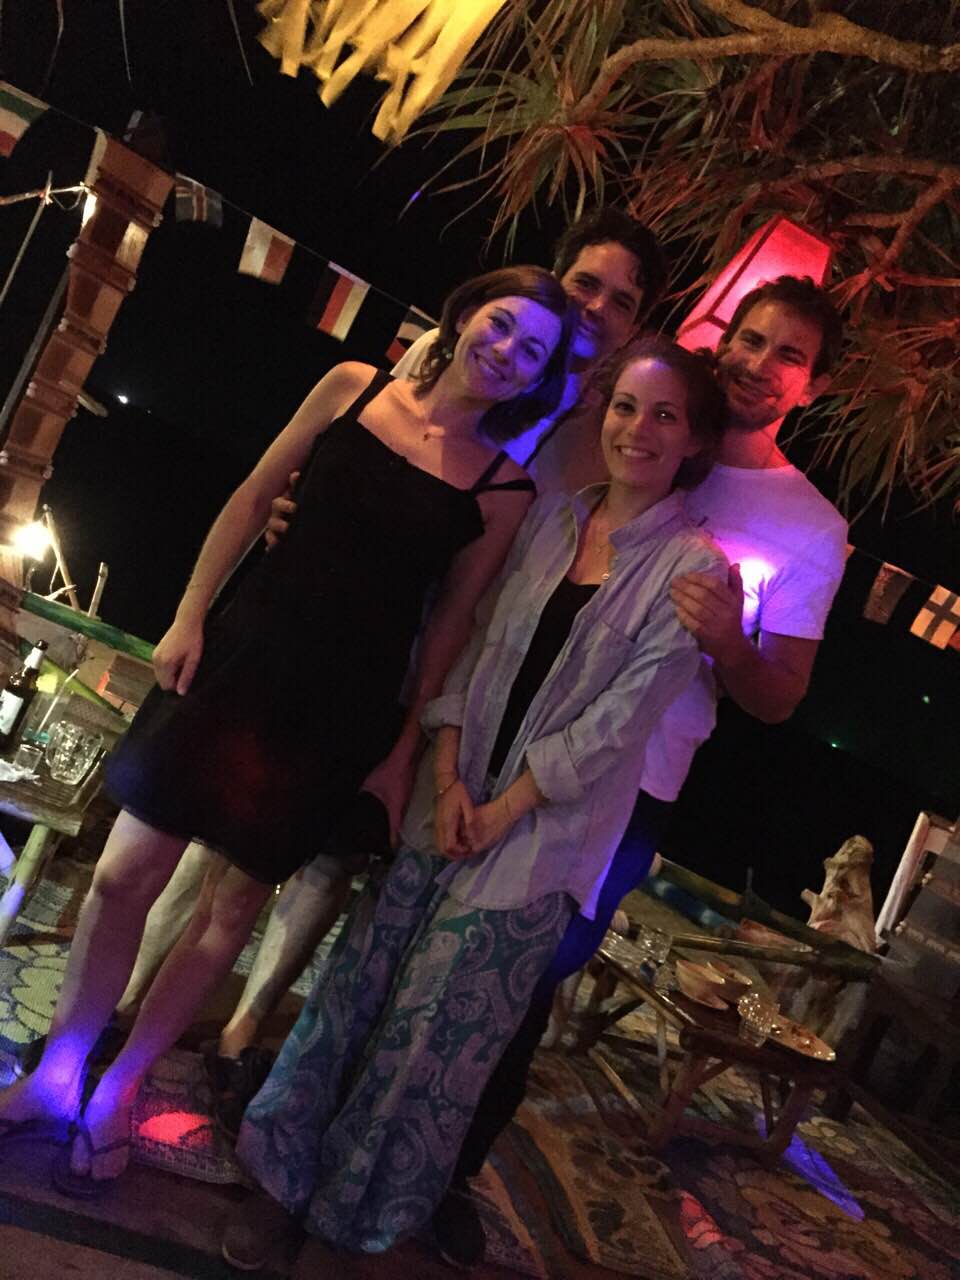 Dinner at Lanta Palace Resort and Beach Club Restaurant with our new friends Julian and Margarit!